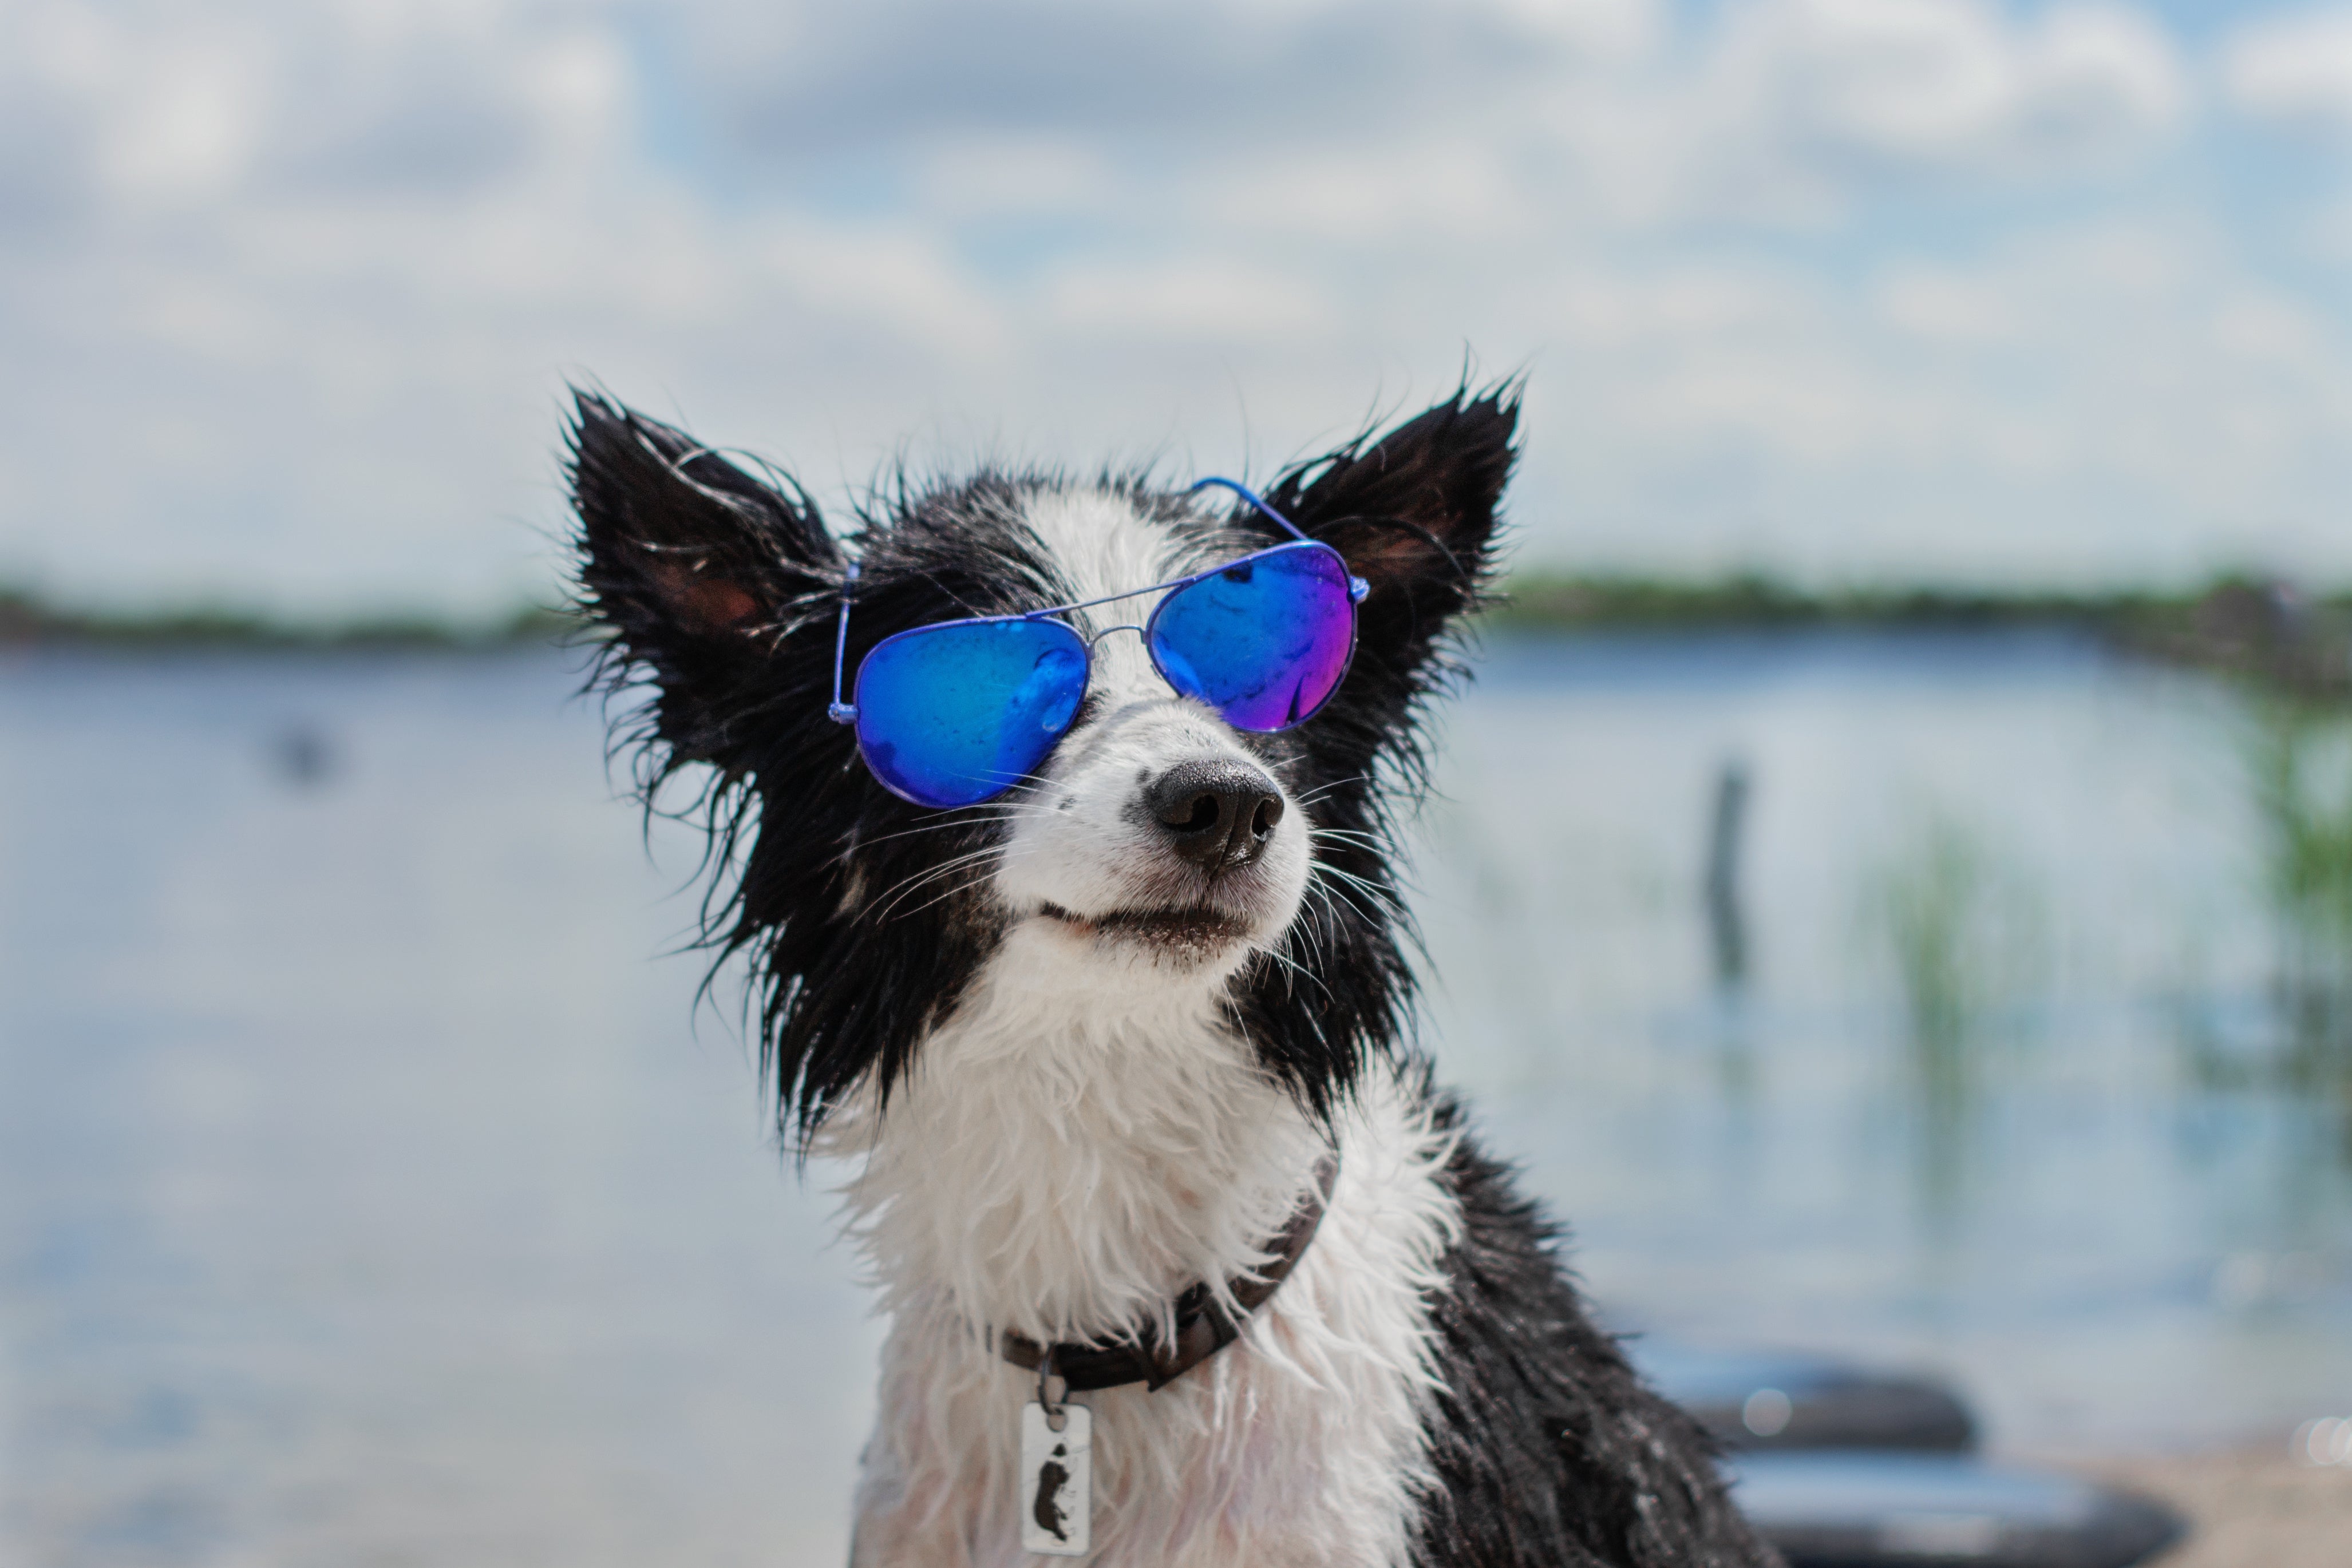 Dog swimming with sunglasses on